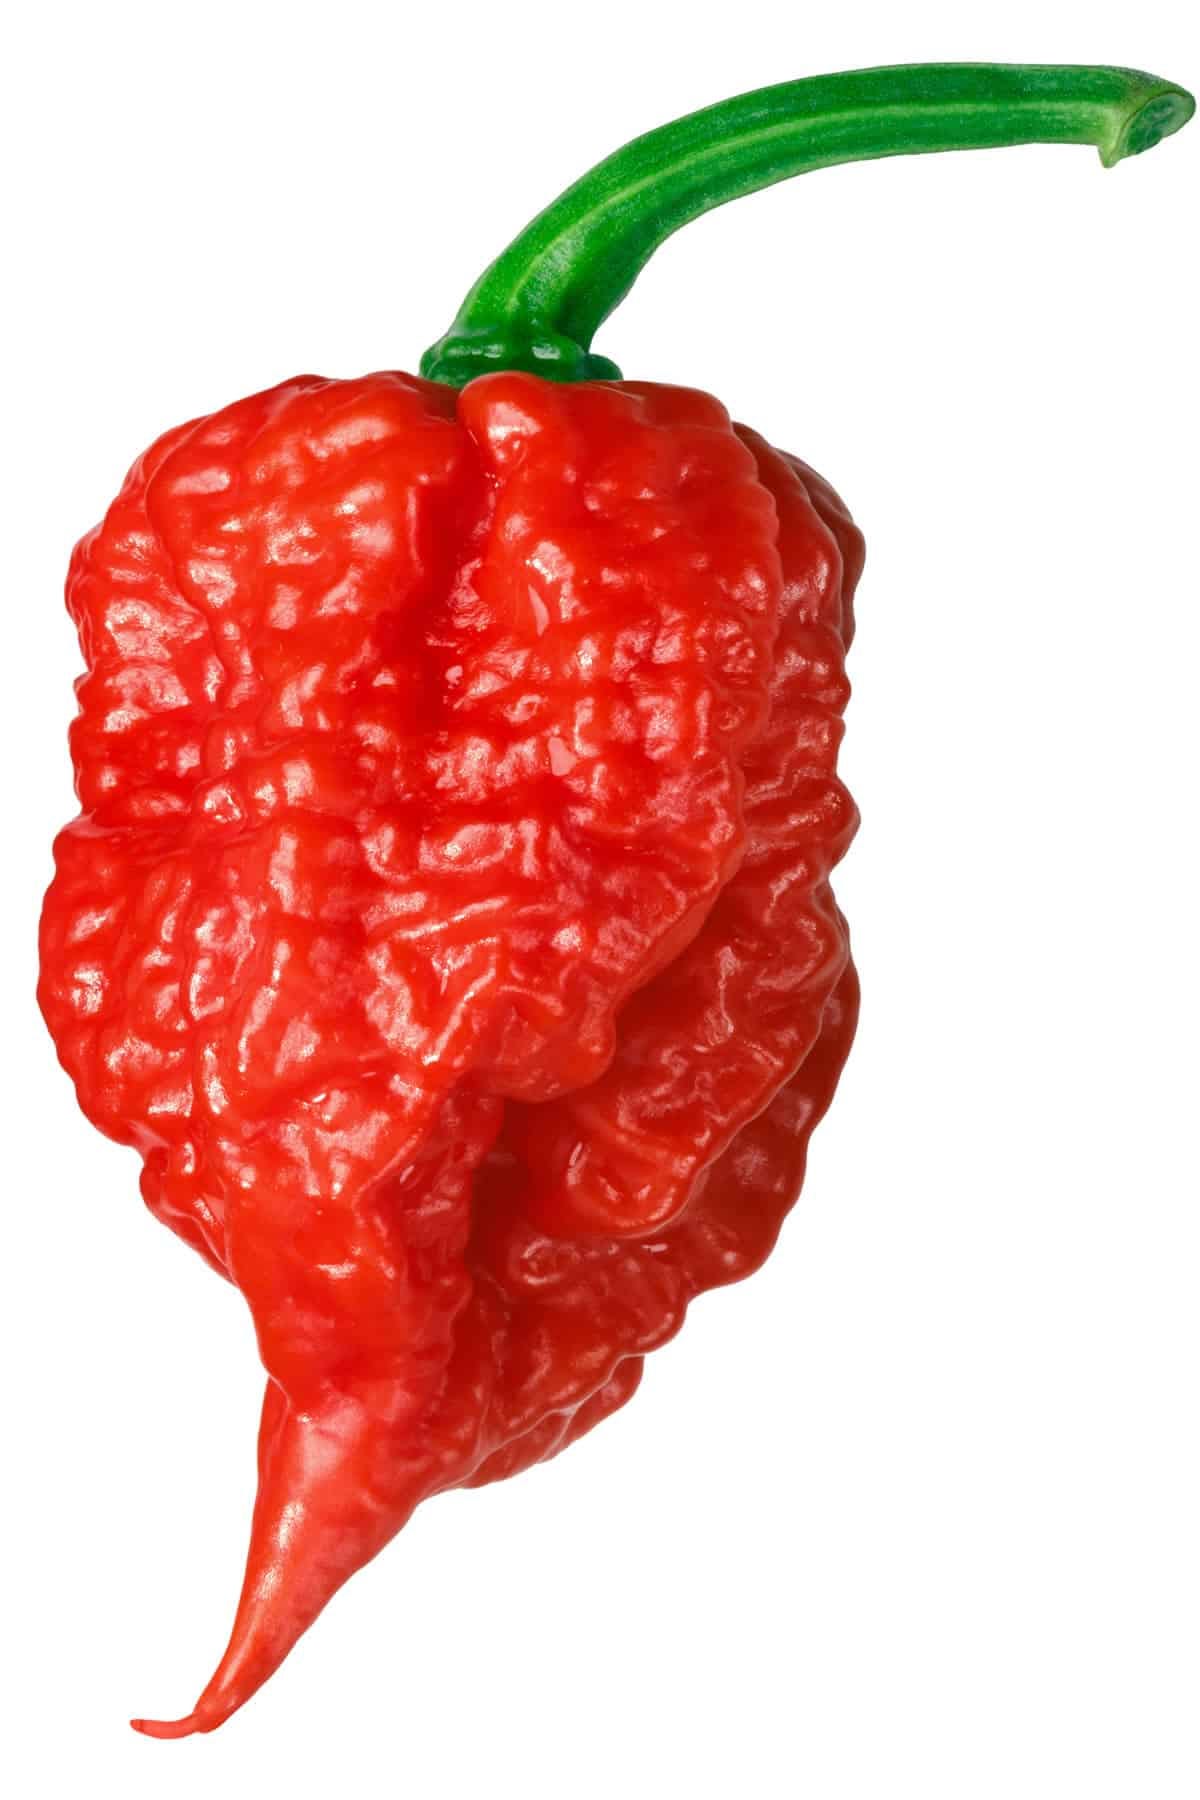 Carolina Reaper: Hottest Pepper in the World - All About It - Chili Pepper  Madness